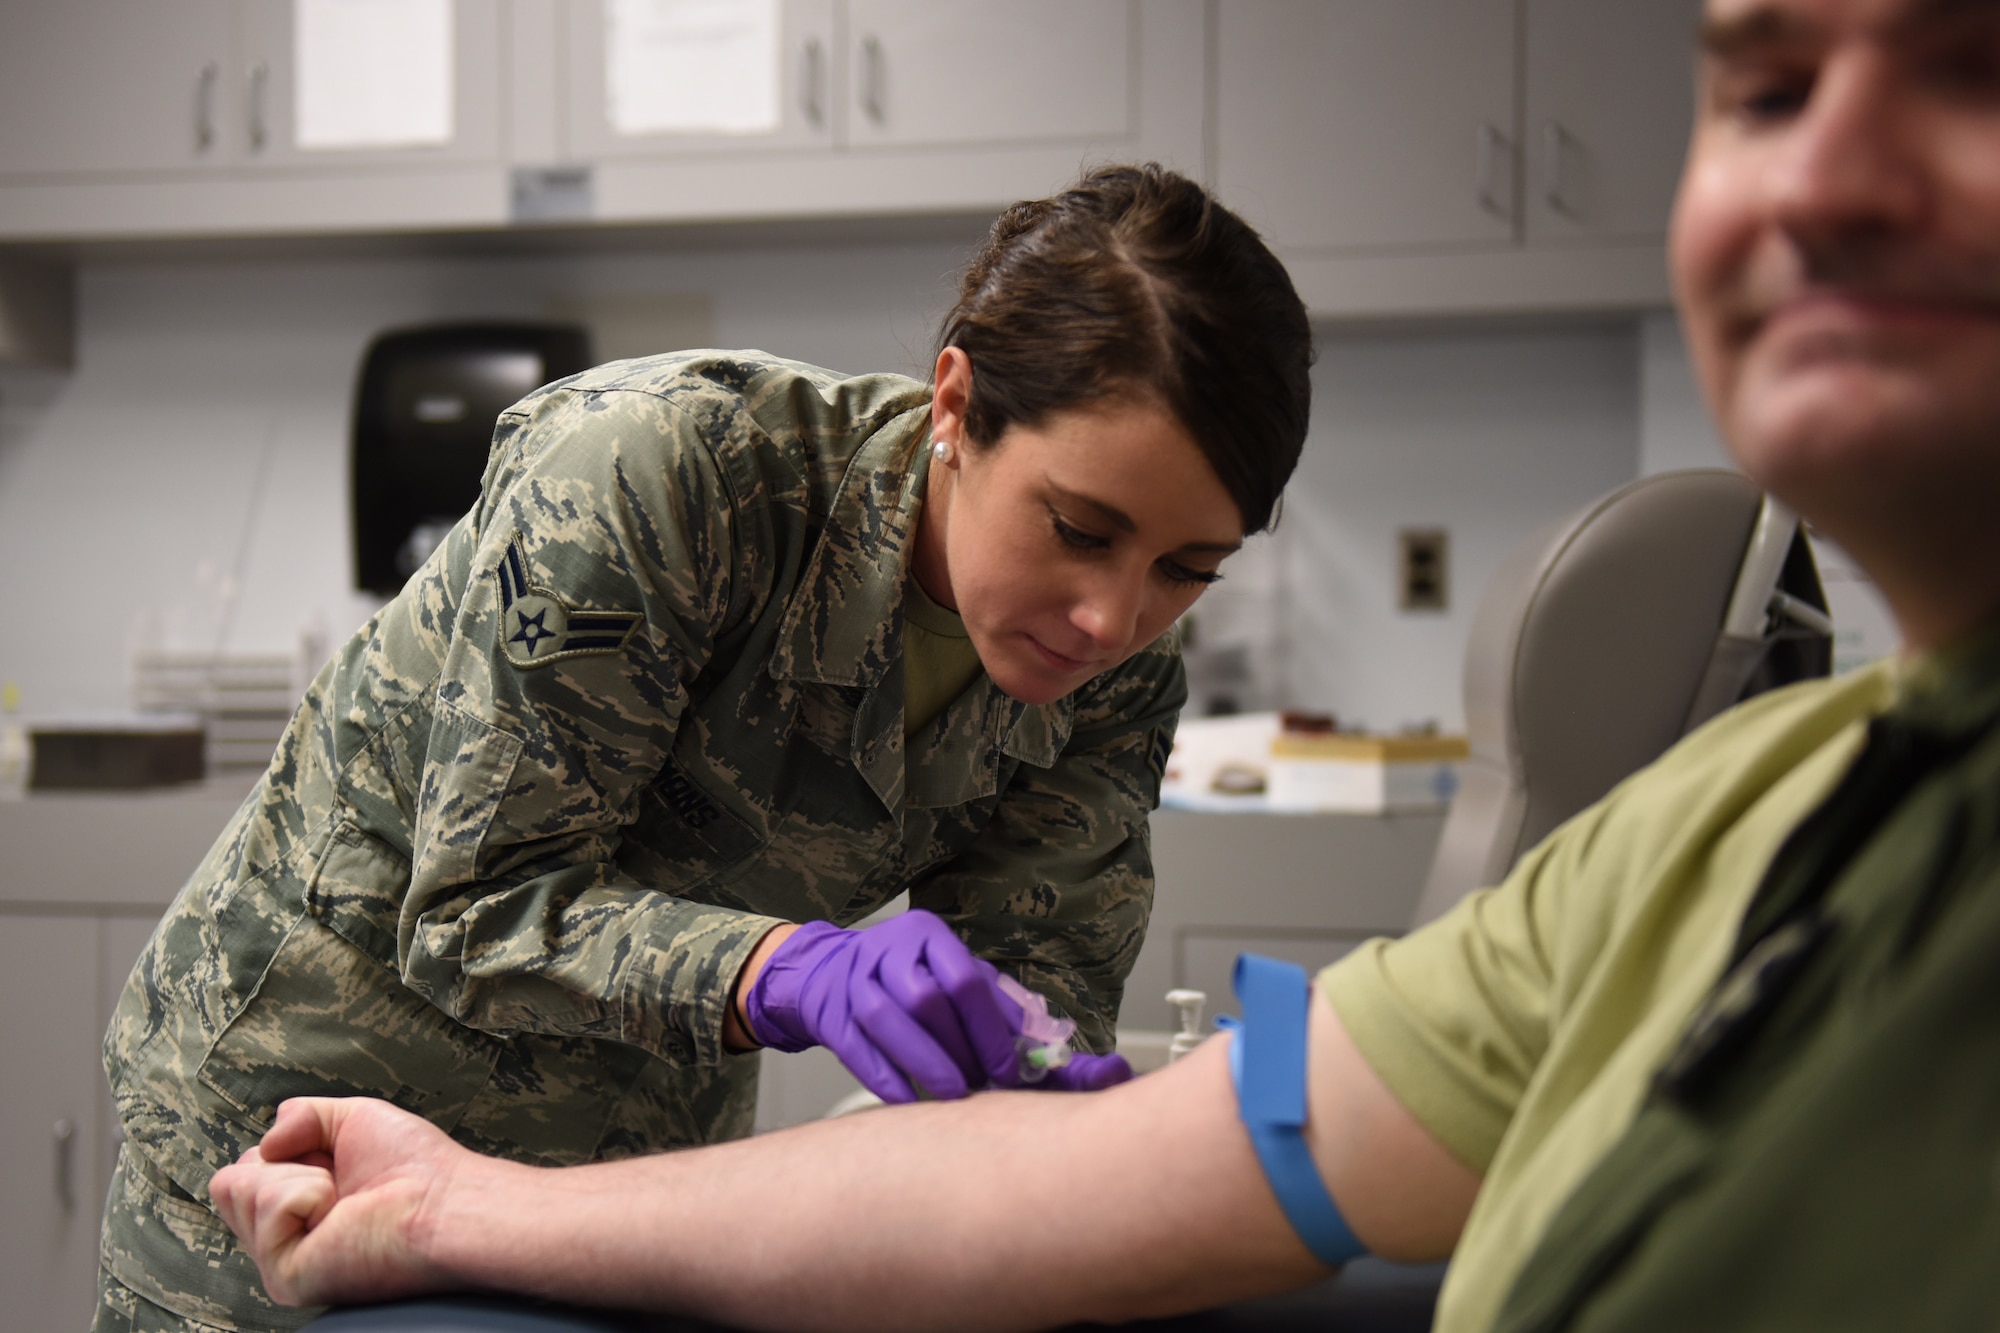 Airman 1st Class Kelsey Symons (left), 193rd Special Operations Wing Medical Group aerospace medical technician, draws a blood sample from an Airman during his regular medical examination on base at Middletown, Pennsylvania. The wing’s flying mission annually requires more than 250 flight physicals and more than 800 occupational health exams to be conducted by the group. (U.S. Air National Guard photo by Senior Airman Ethan Carl/Released)